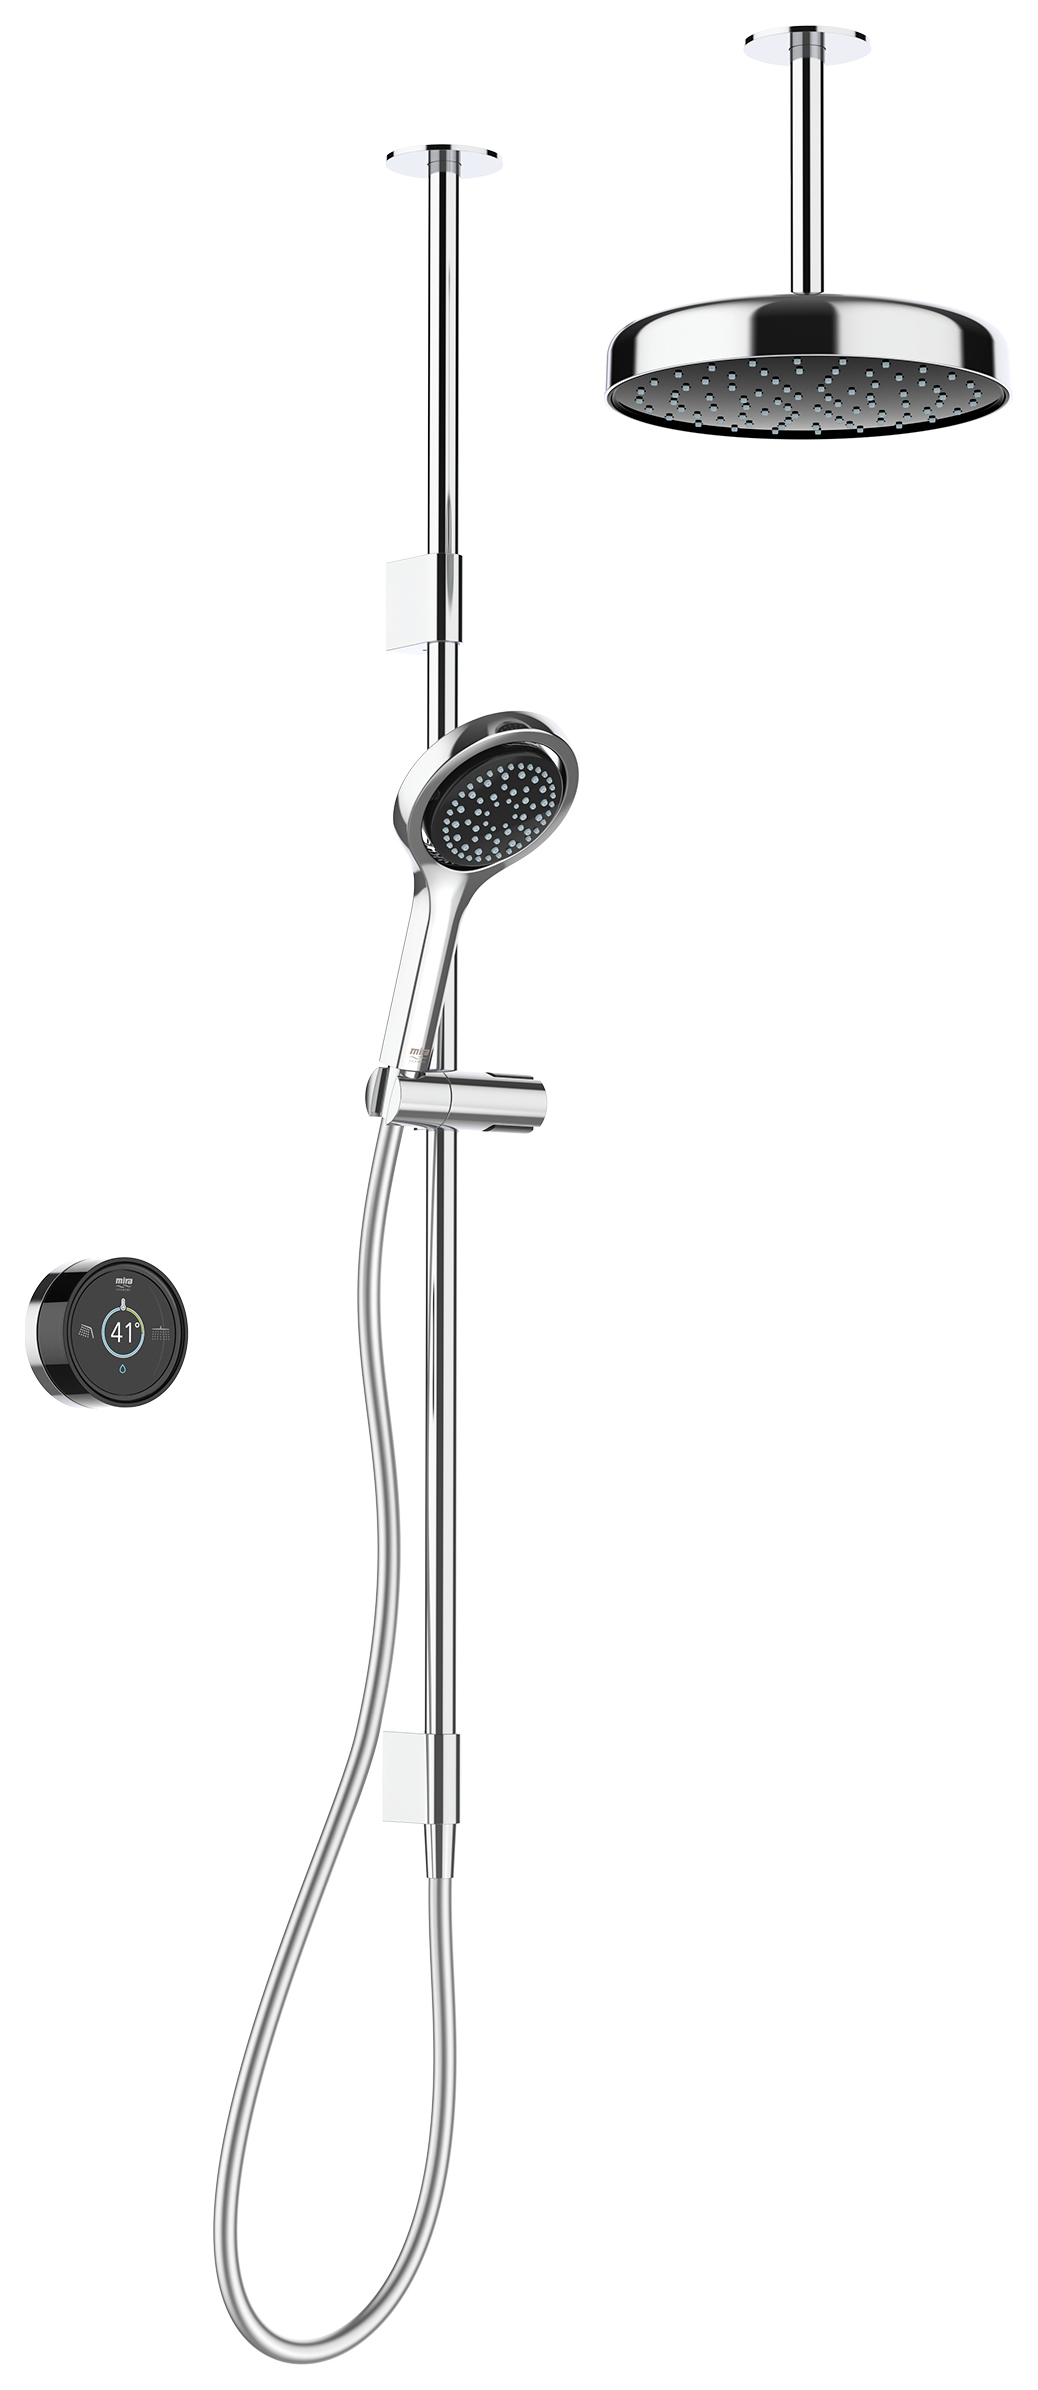 Mira Platinum Dual Outlet Ceiling Fed High or Low Pressure Digital Mixer Shower